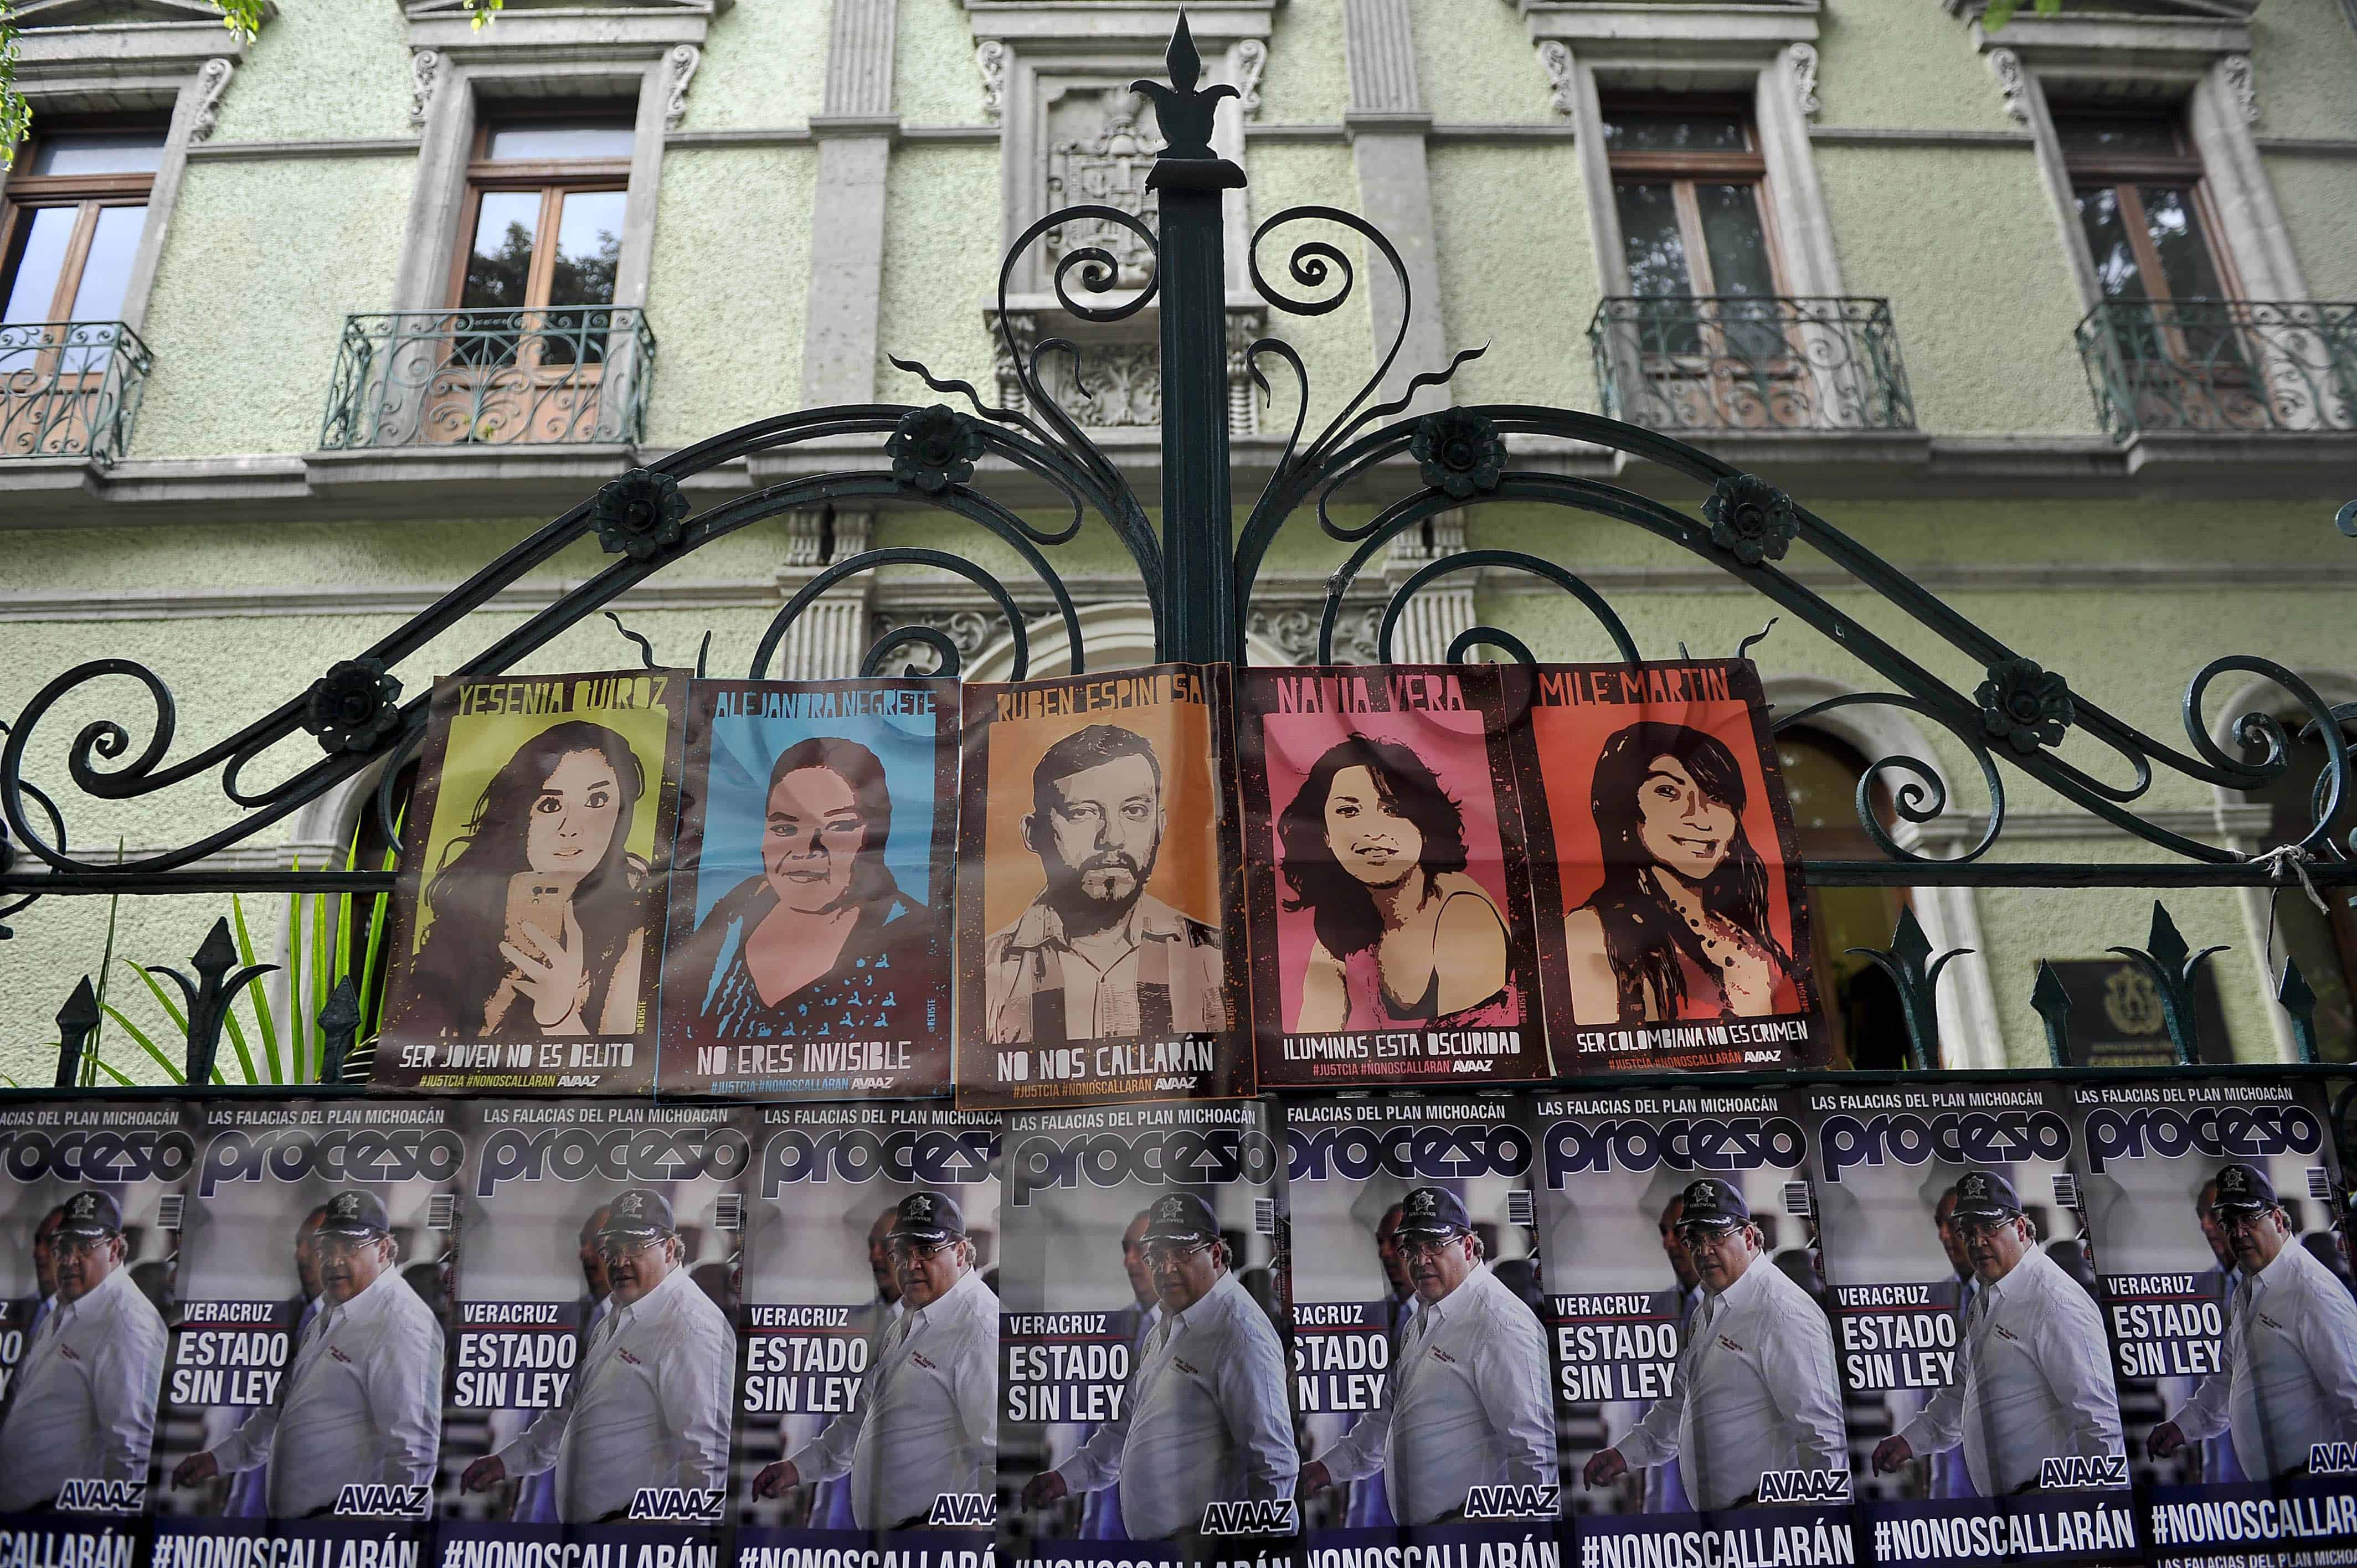 Posters with the image of Veracruz state Governor Javier Duarte (at bottom) and the victims of a horrendous killing hang outside the office of Veracruz state officials in Mexico City on Aug. 31, 2015.